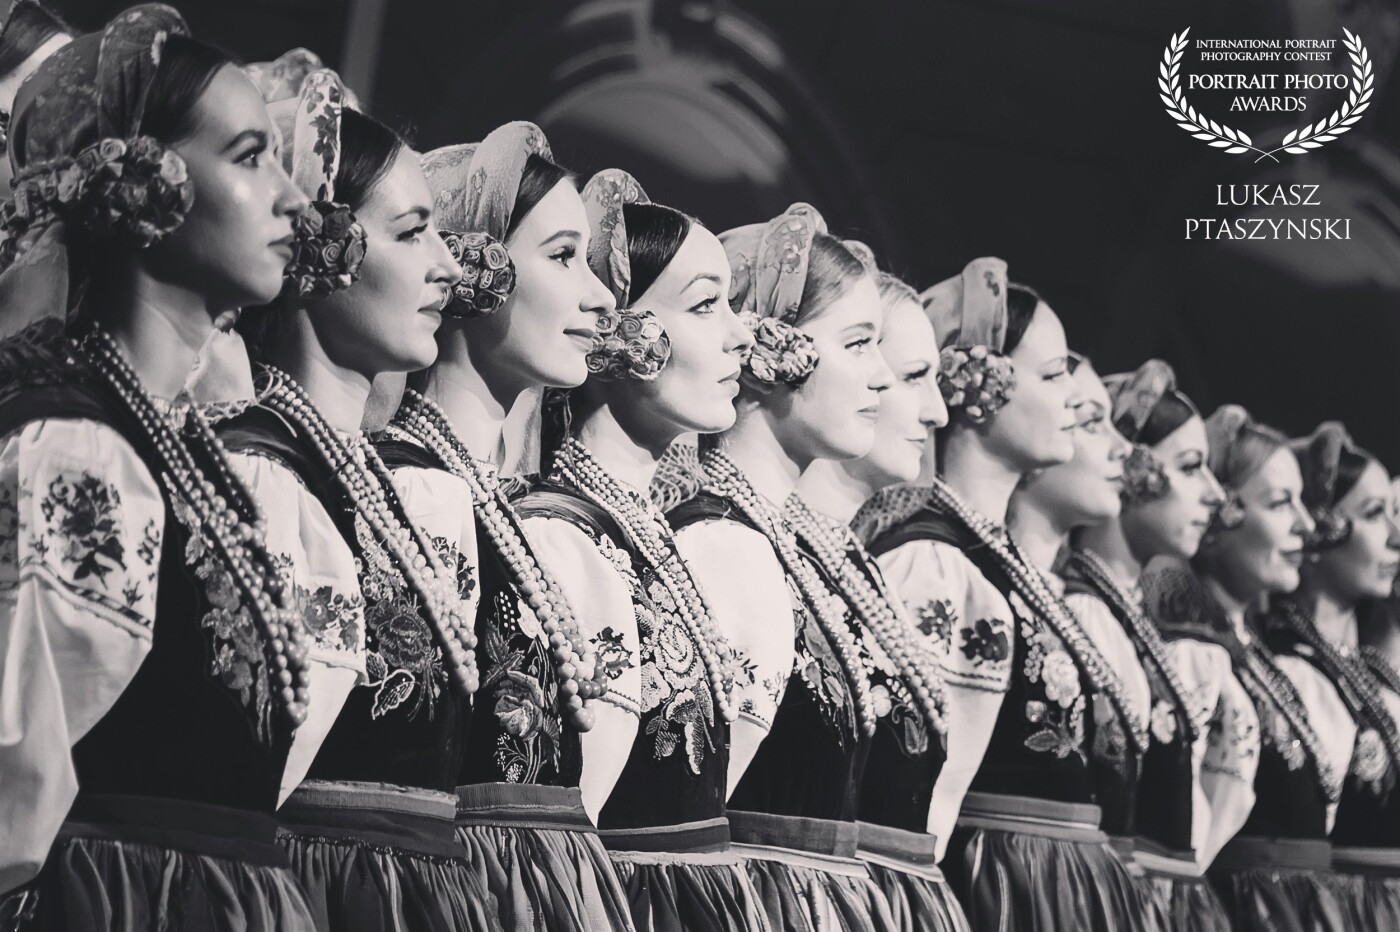 The photo was taken during the International Festival of Warsaw. Ladies on the pic belong to a famous Polish folk group, Mazowsze, who popularize traditional music and dances. During the Festival, they were performing a great concert of Polish carols.